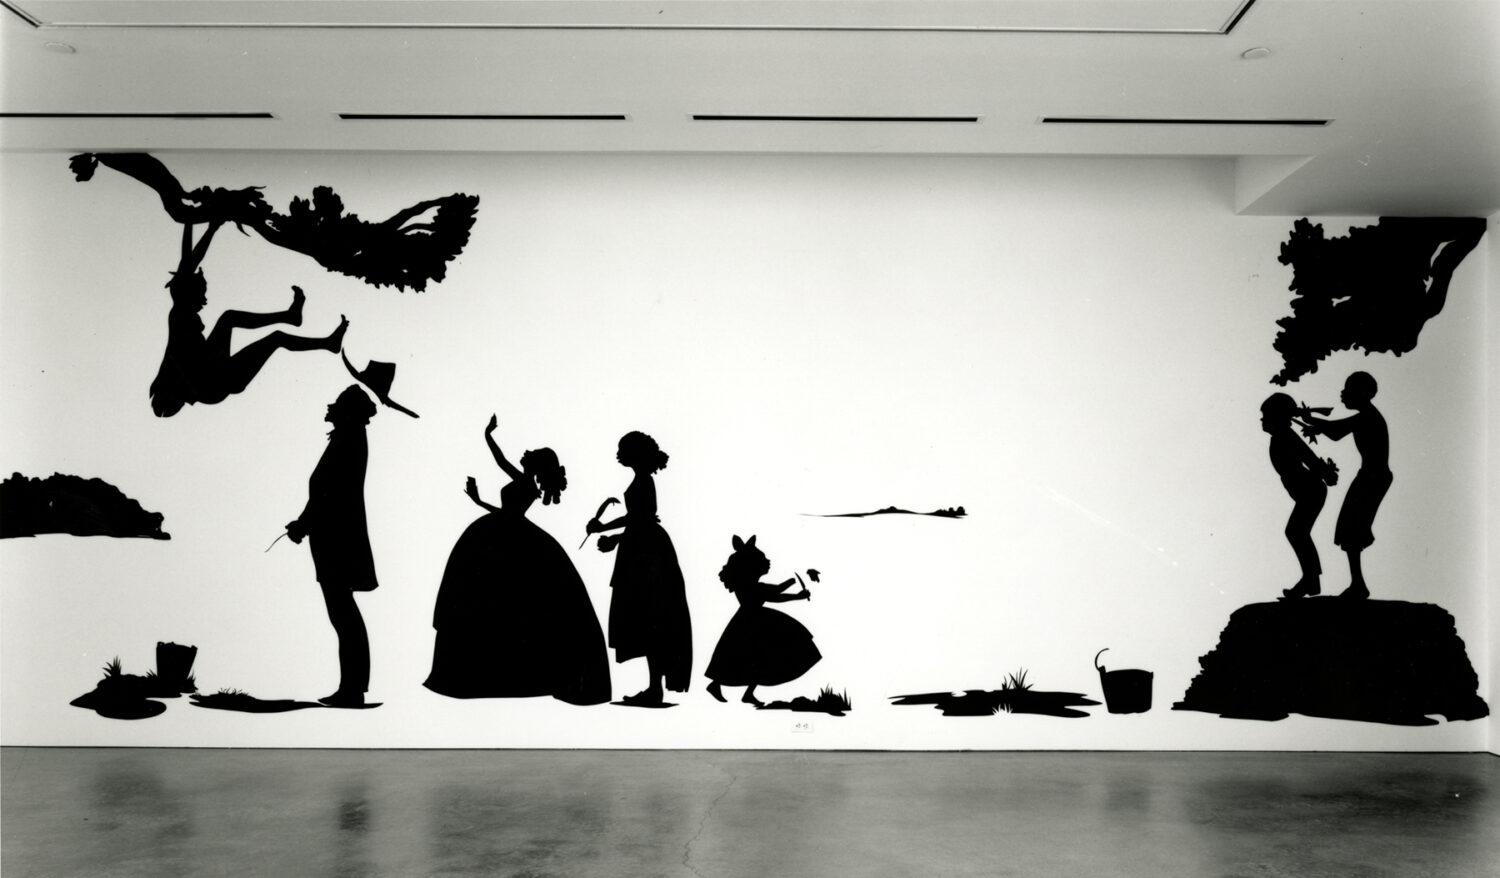 Paper Cutting: Using Silhouettes in Classical and Contemporary Art